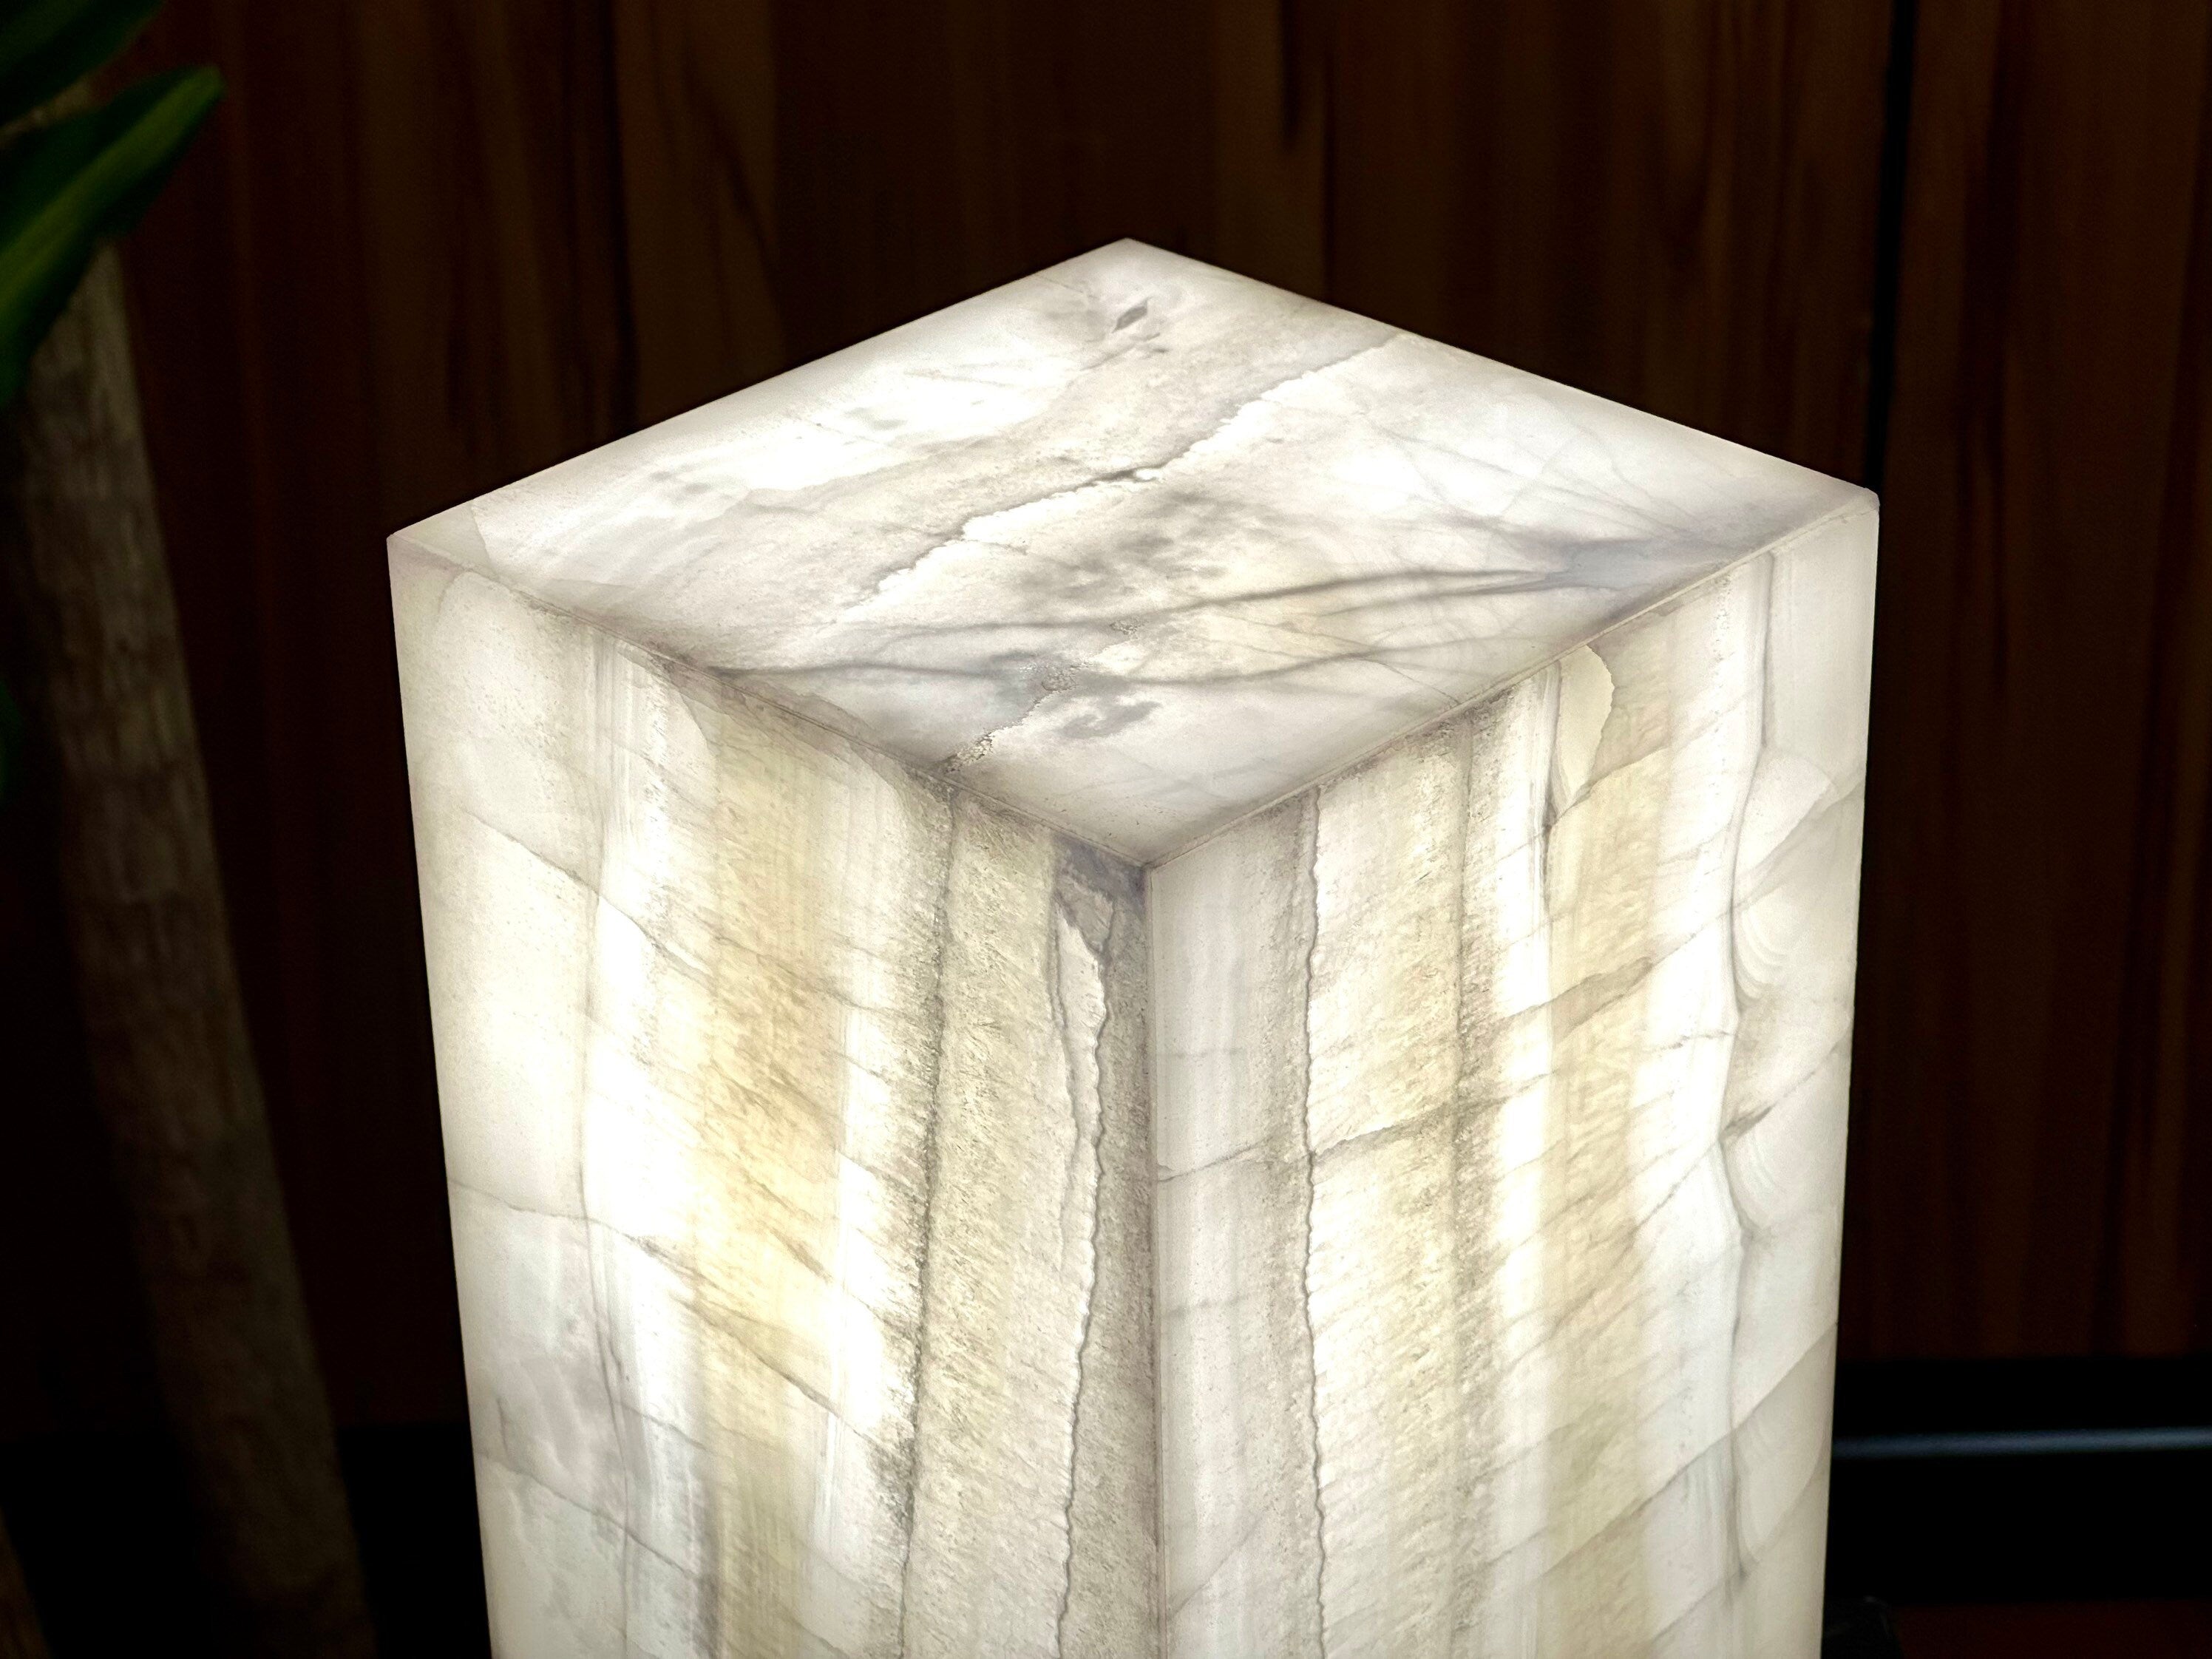 Onyx Nightstand Lamp - Handmade Table Lamp for Bedroom and Living Room Decor, Beautiful Onyx Stone Accent to Brighten Your Space